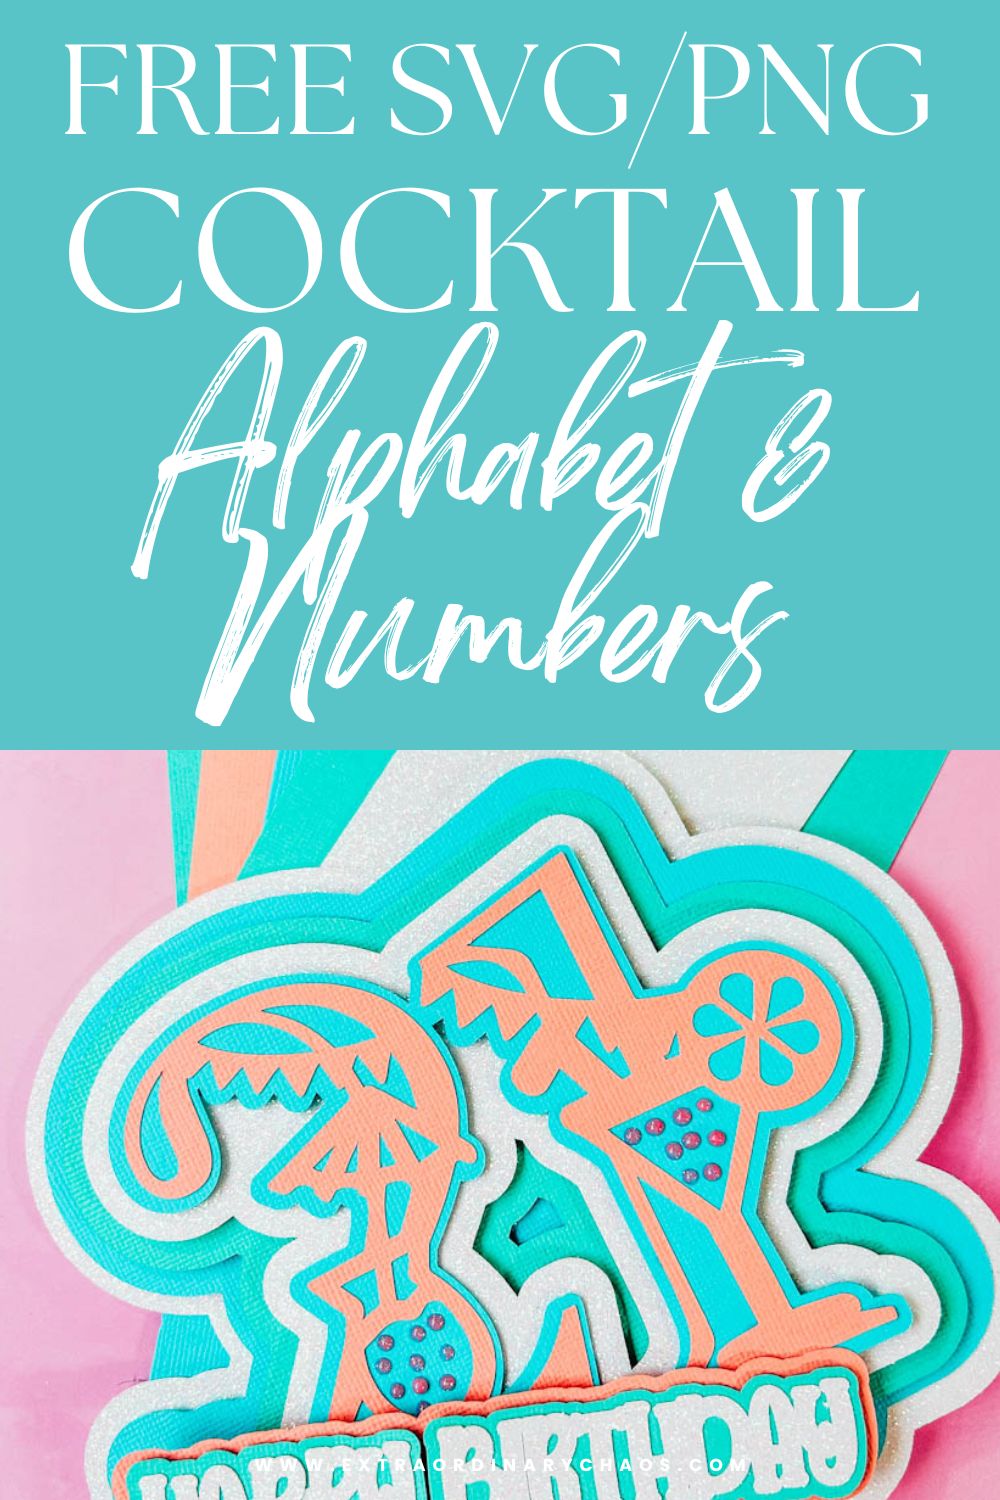 Free cocktail alphabet letters and numbers for Cricut and silhouette